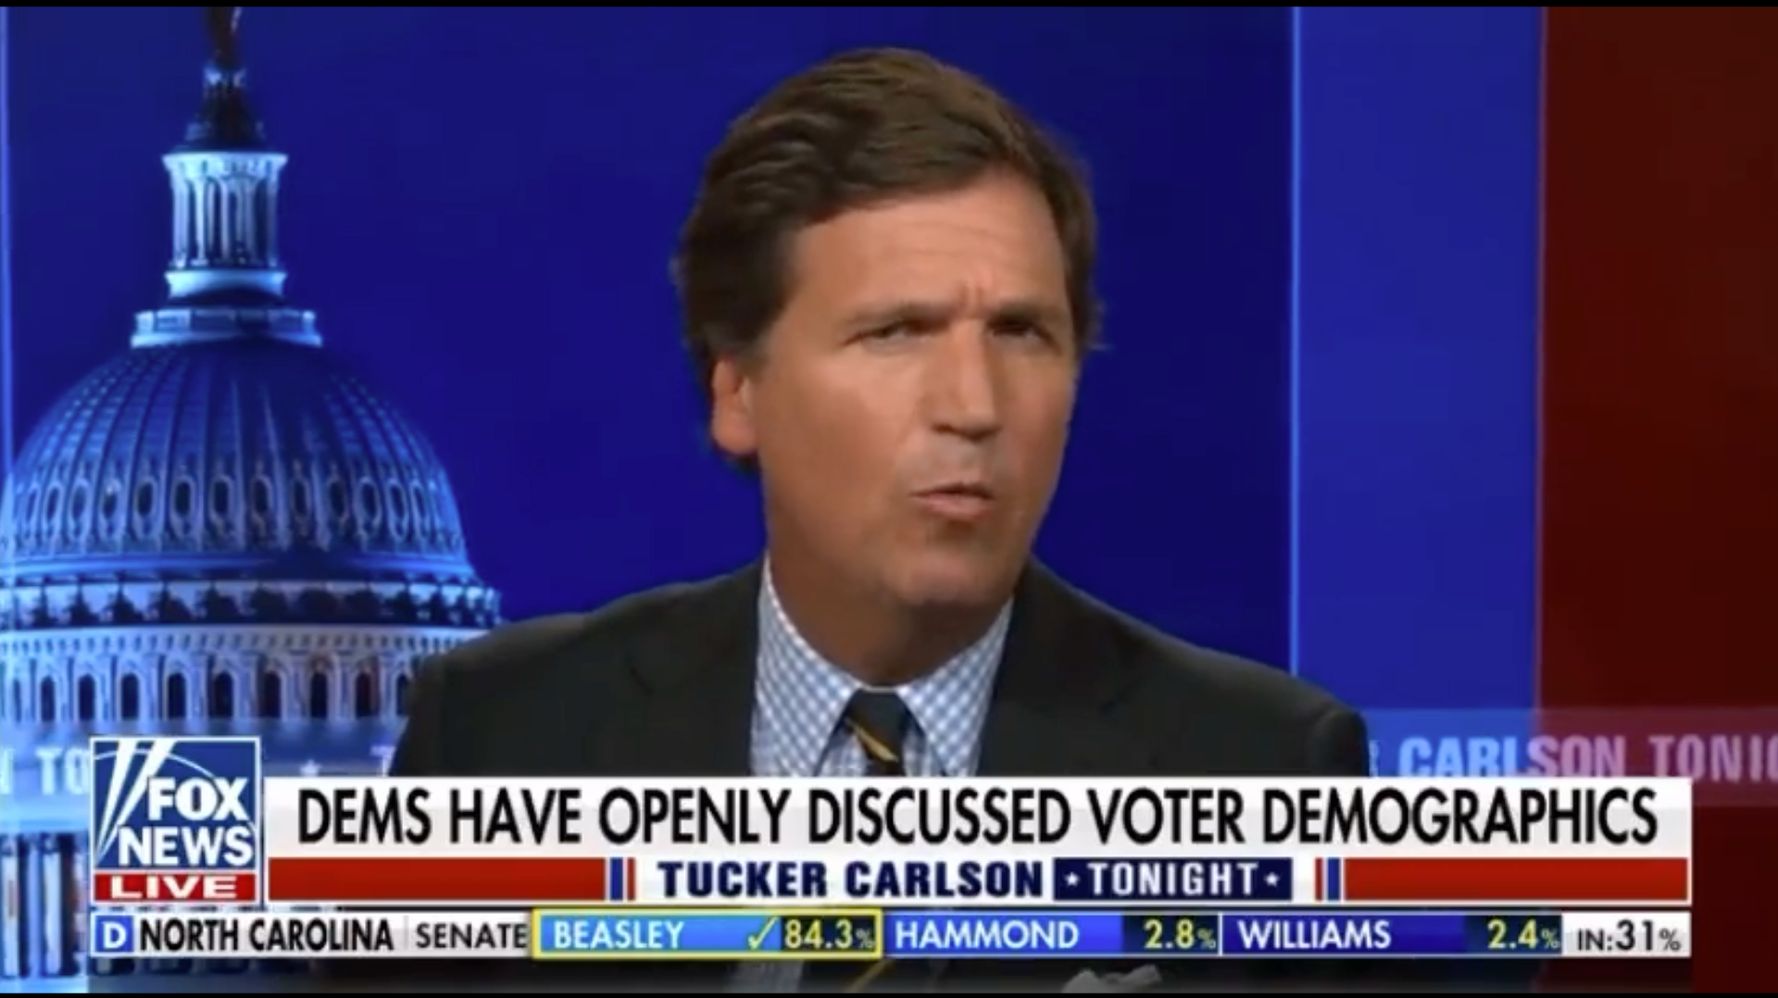 Tucker Carlson ‘Not Sure’ About Great Replacement Theory A